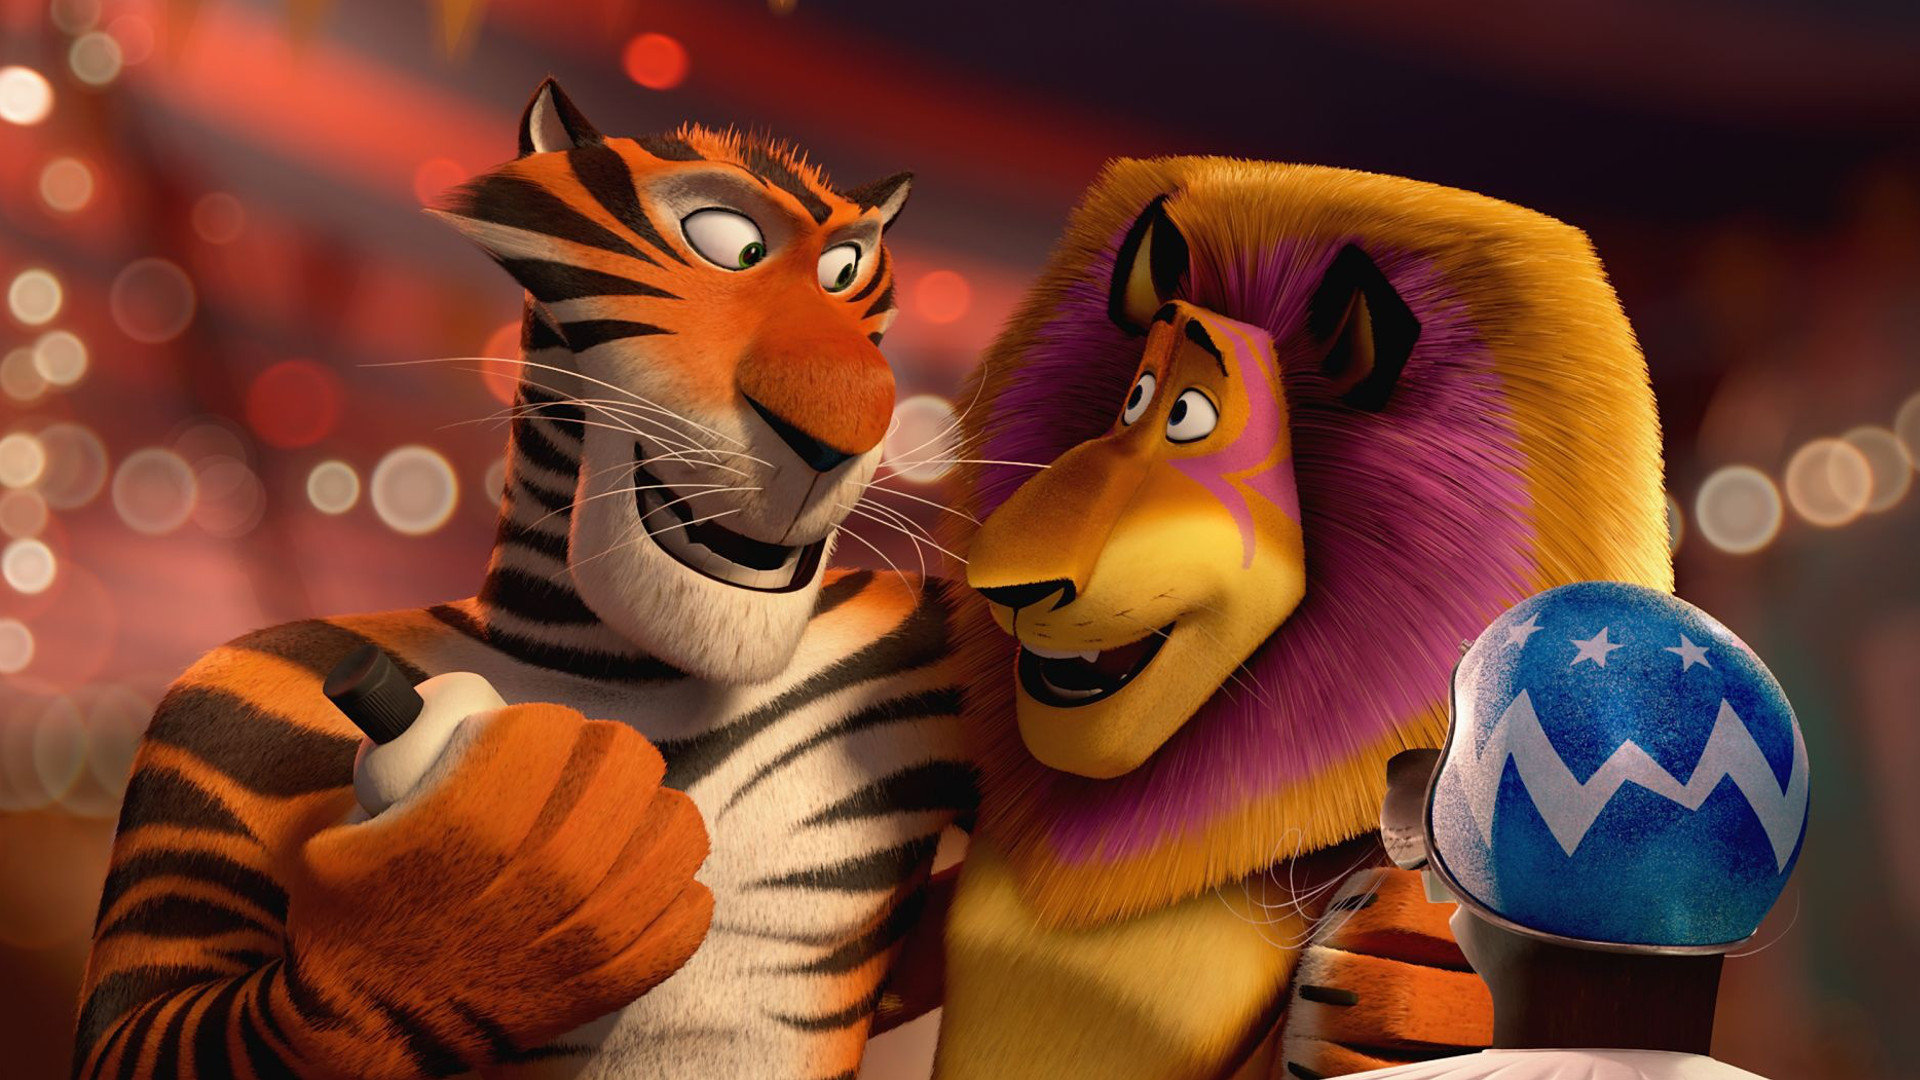 Awesome Madagascar 3: Europe's Most Wanted free wallpaper ID:451716 for full hd desktop